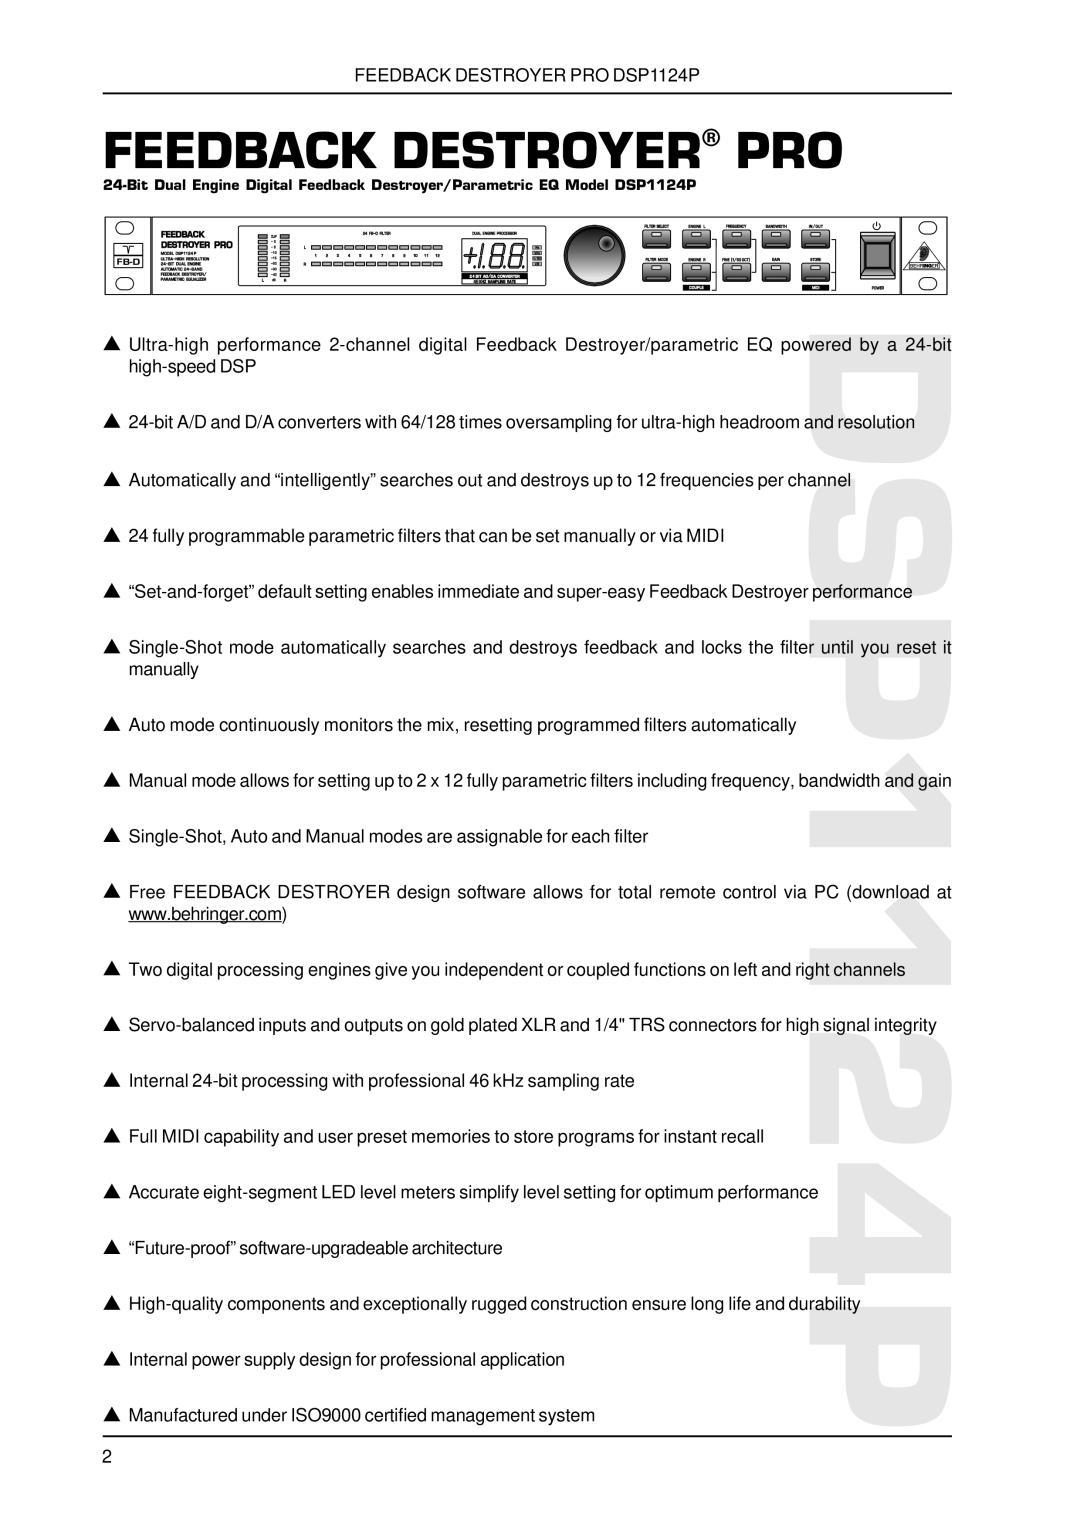 Behringer dsp1124p technical specifications Feedback Destroyer Pro 